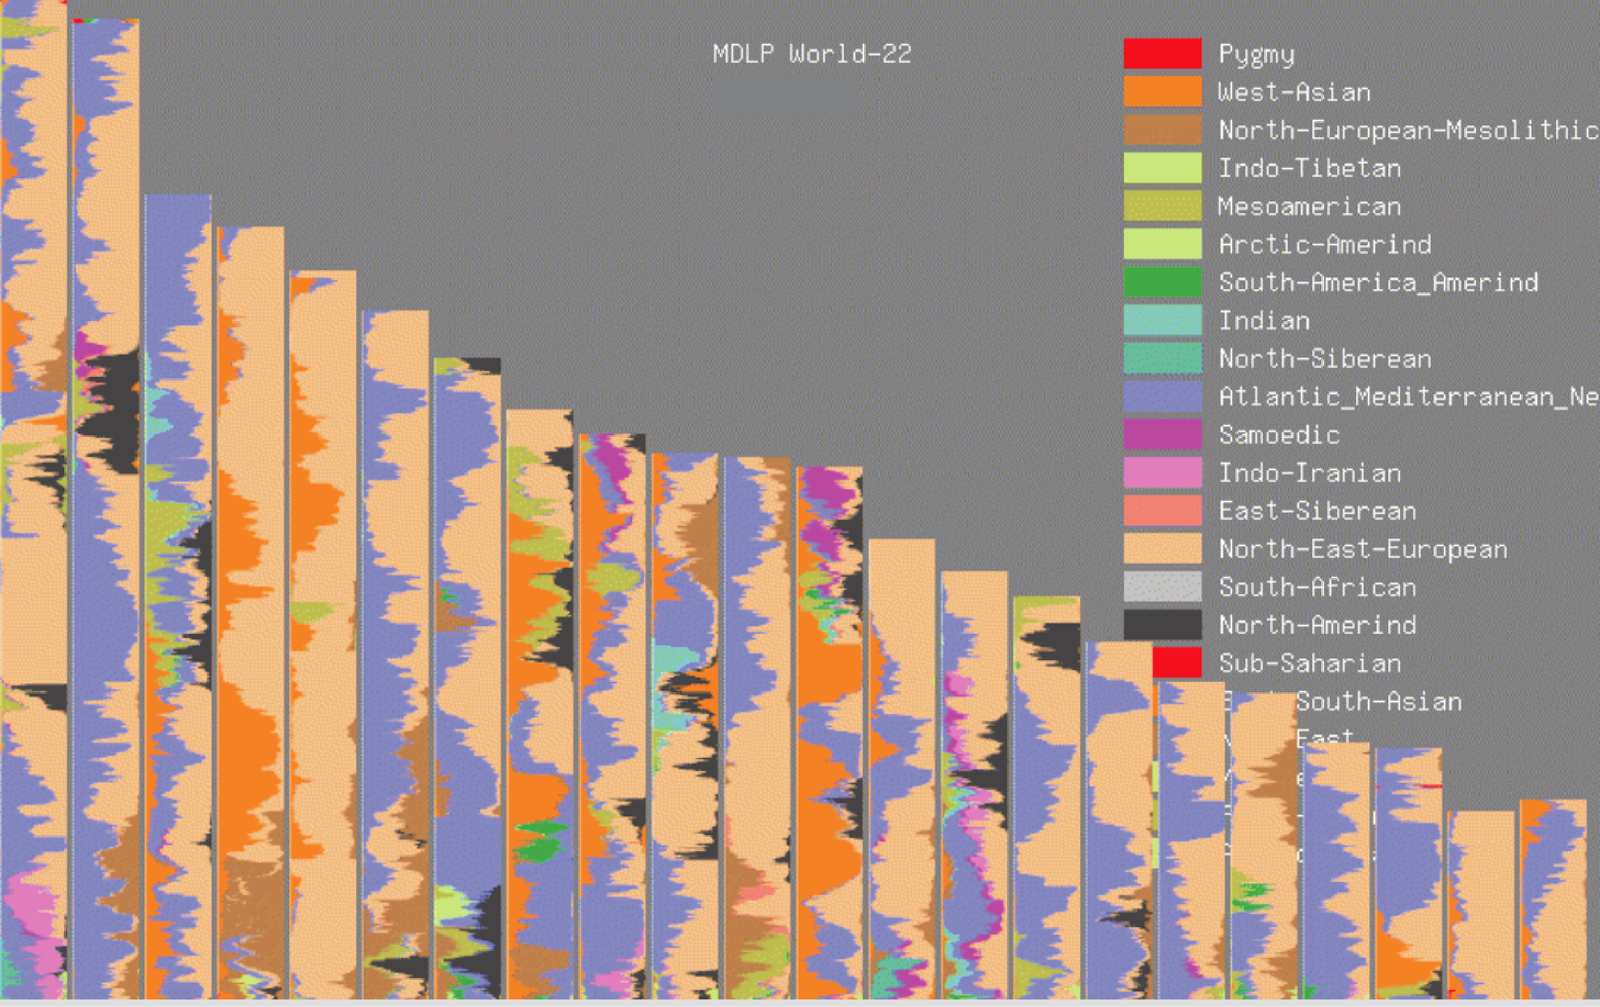 GEDmatch MDLP World-22 admixture results displayed as chromosome painting.